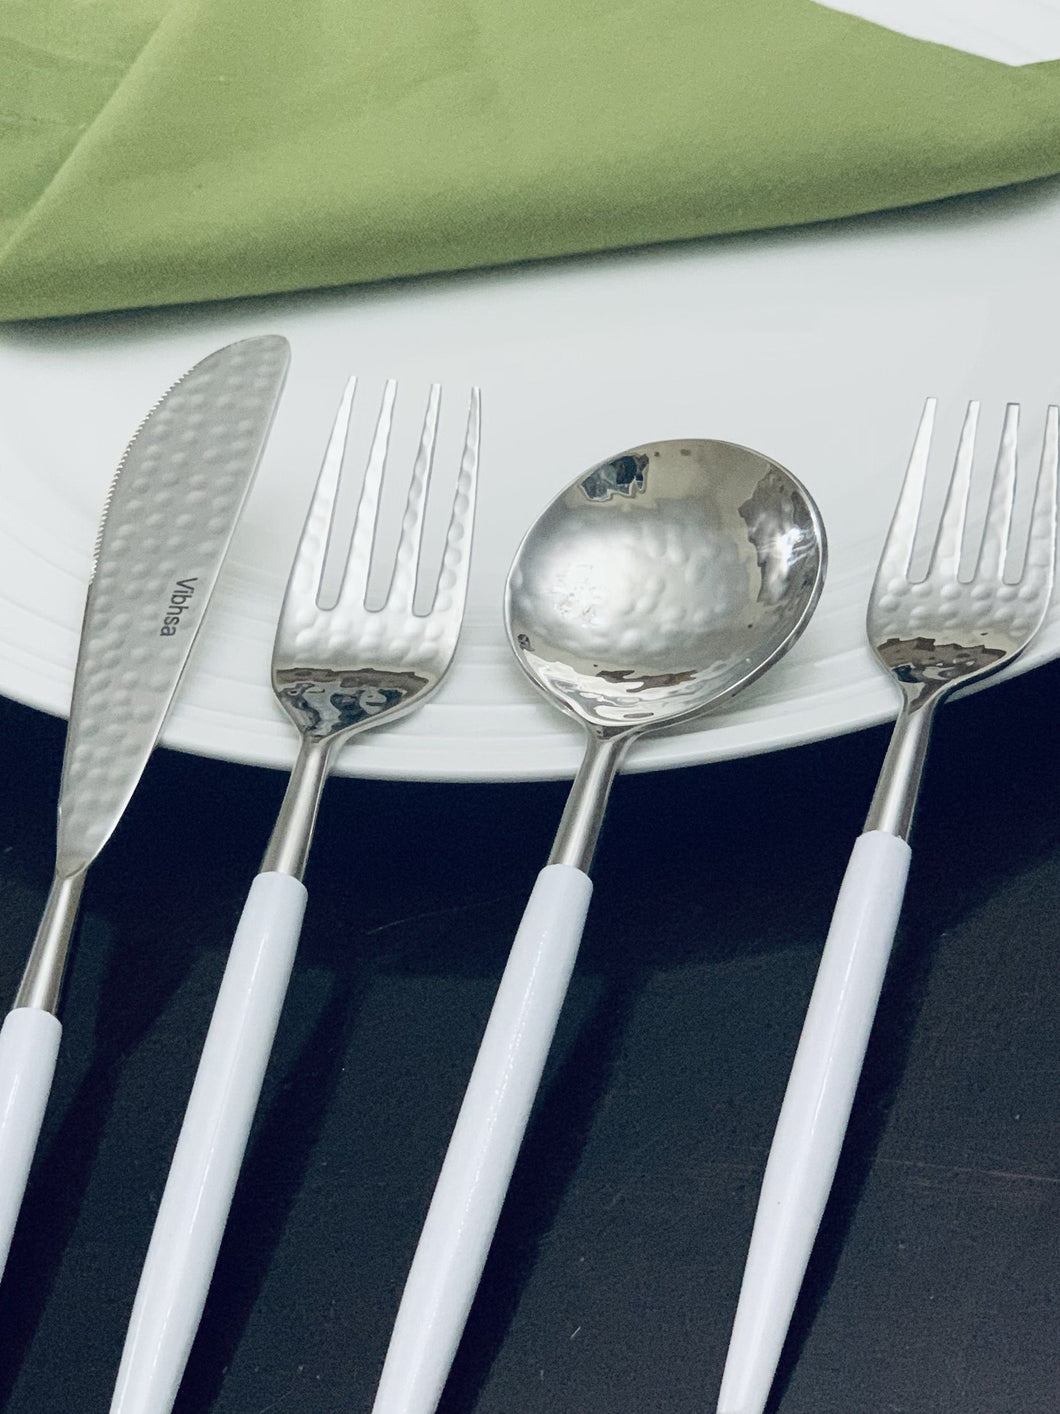 Vibhsa White Flatware Set 5 Piece Place Setting (Hammered Mouth)